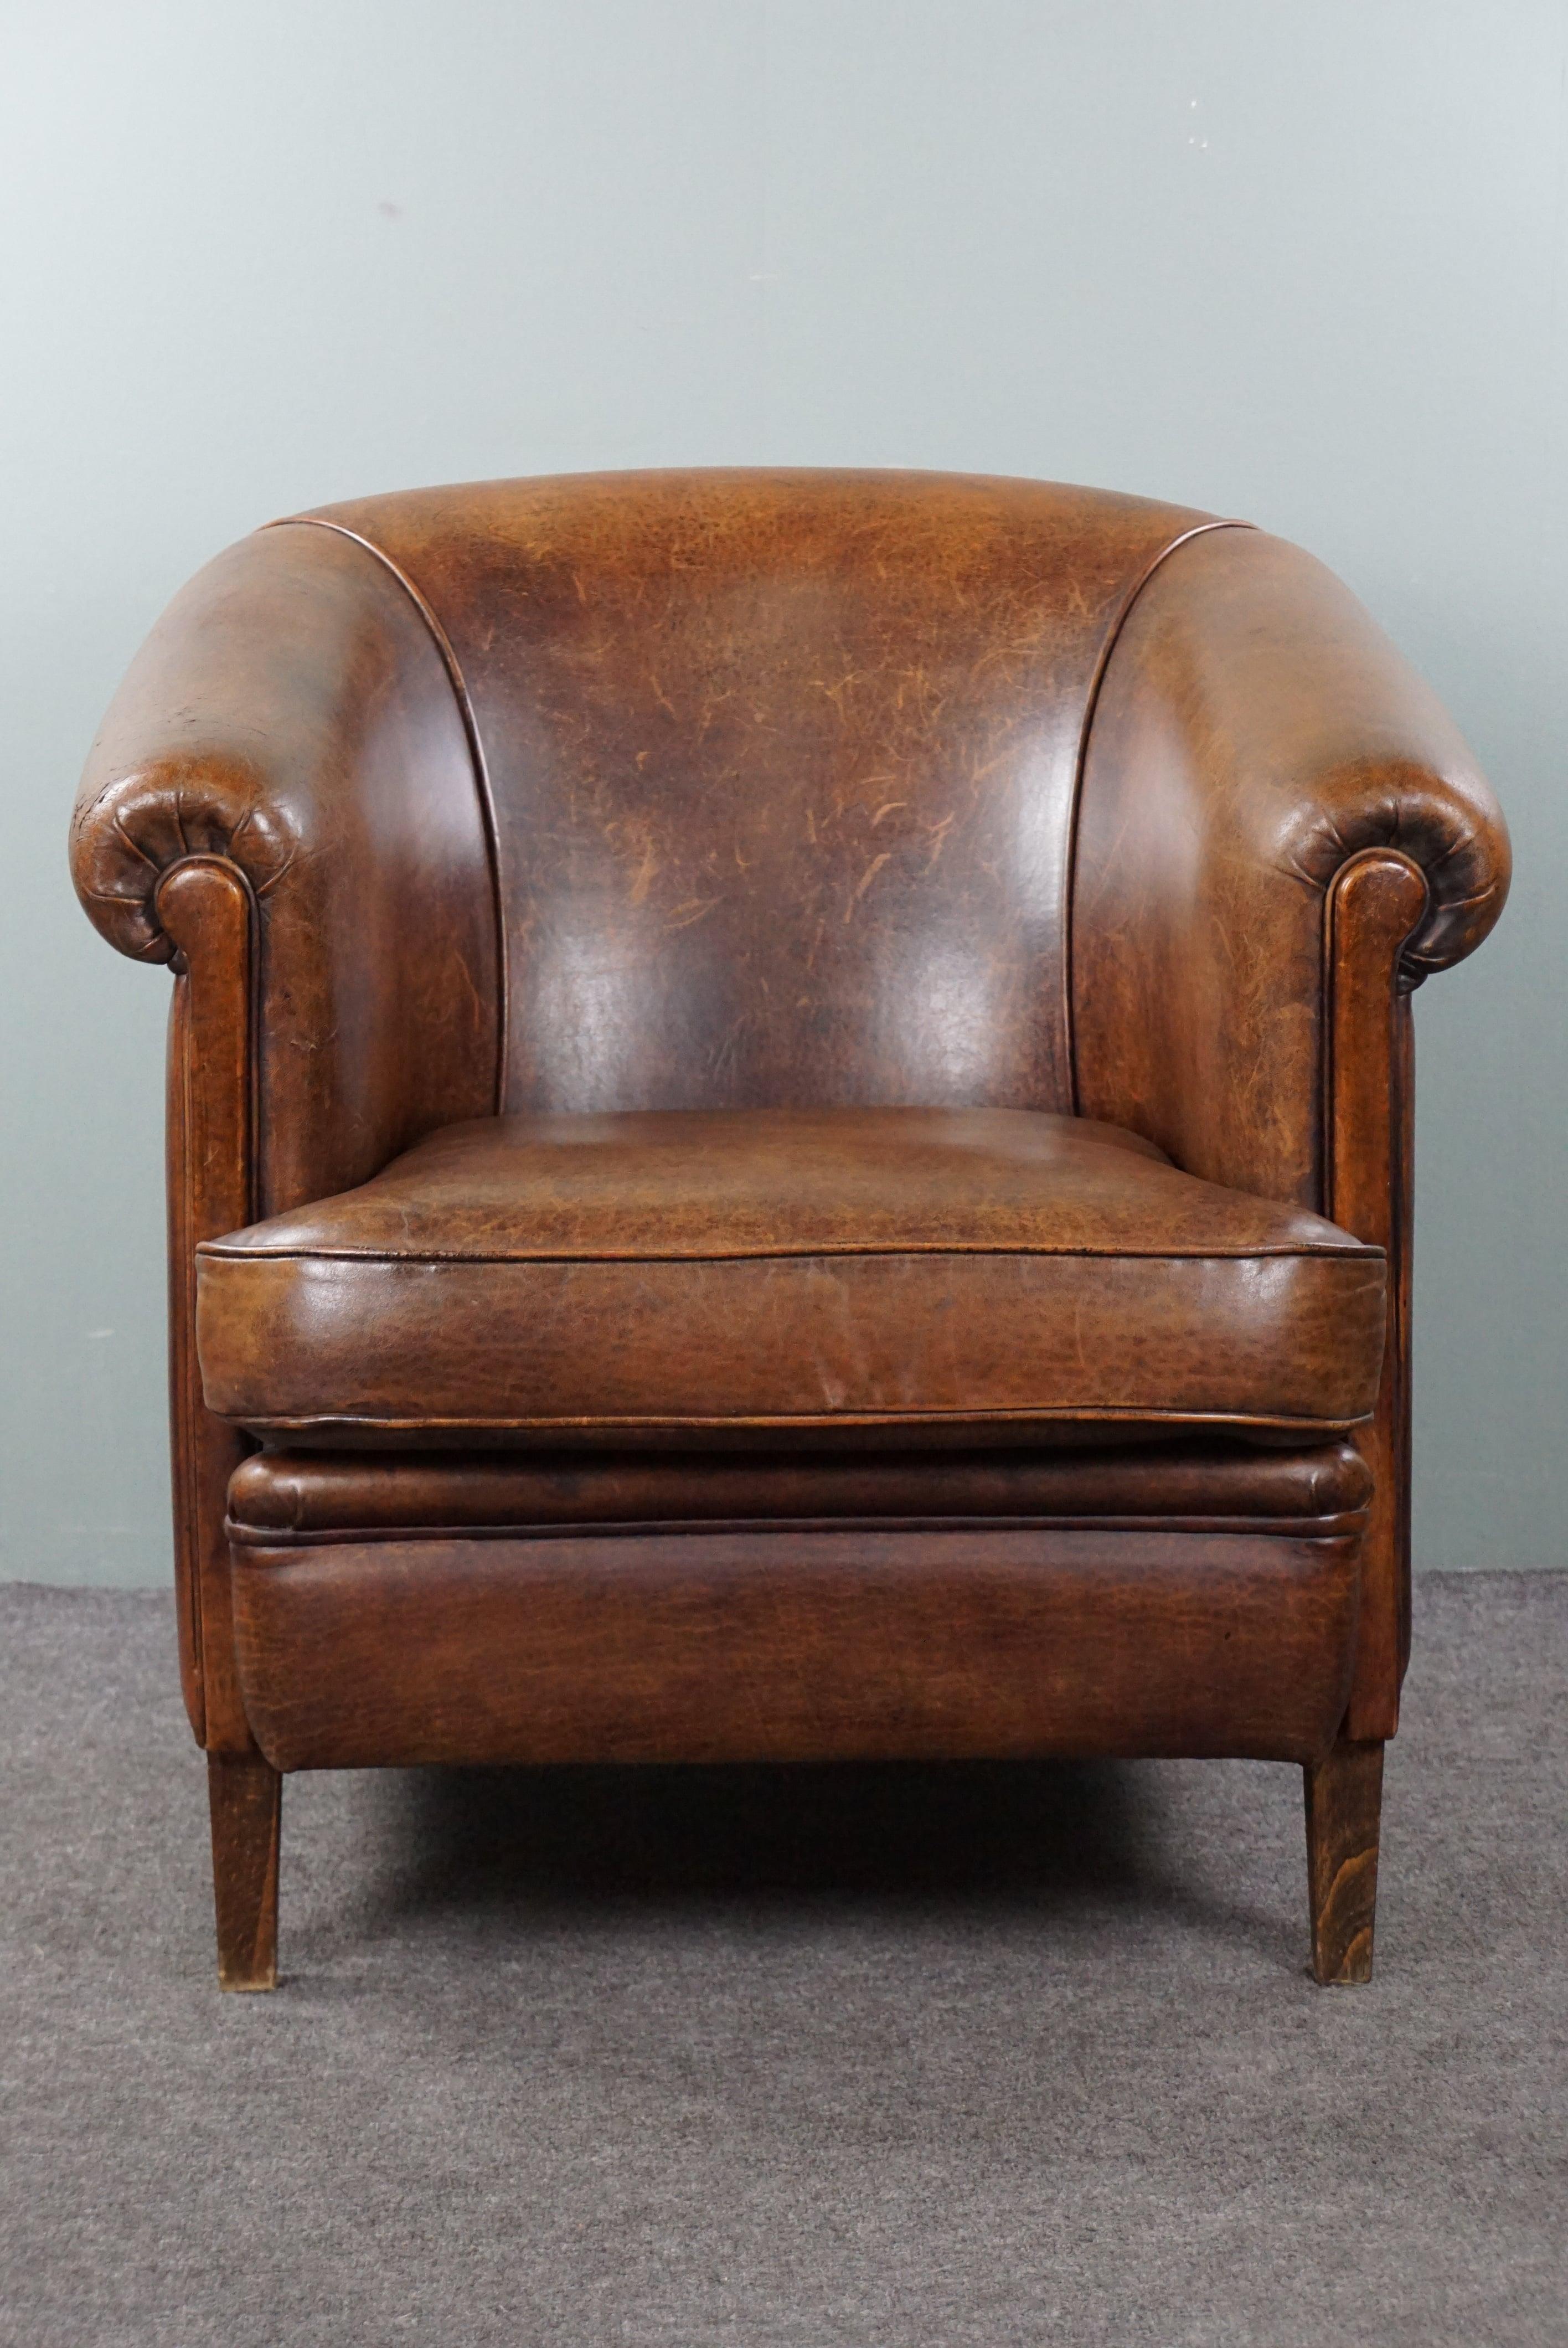 Offered is this beautifully subtly aged sheep leather club armchair finished with a matching tone piping. This incredibly delightful and comfortable sheep leather club armchair has acquired a lovely patina through responsible use. By using a